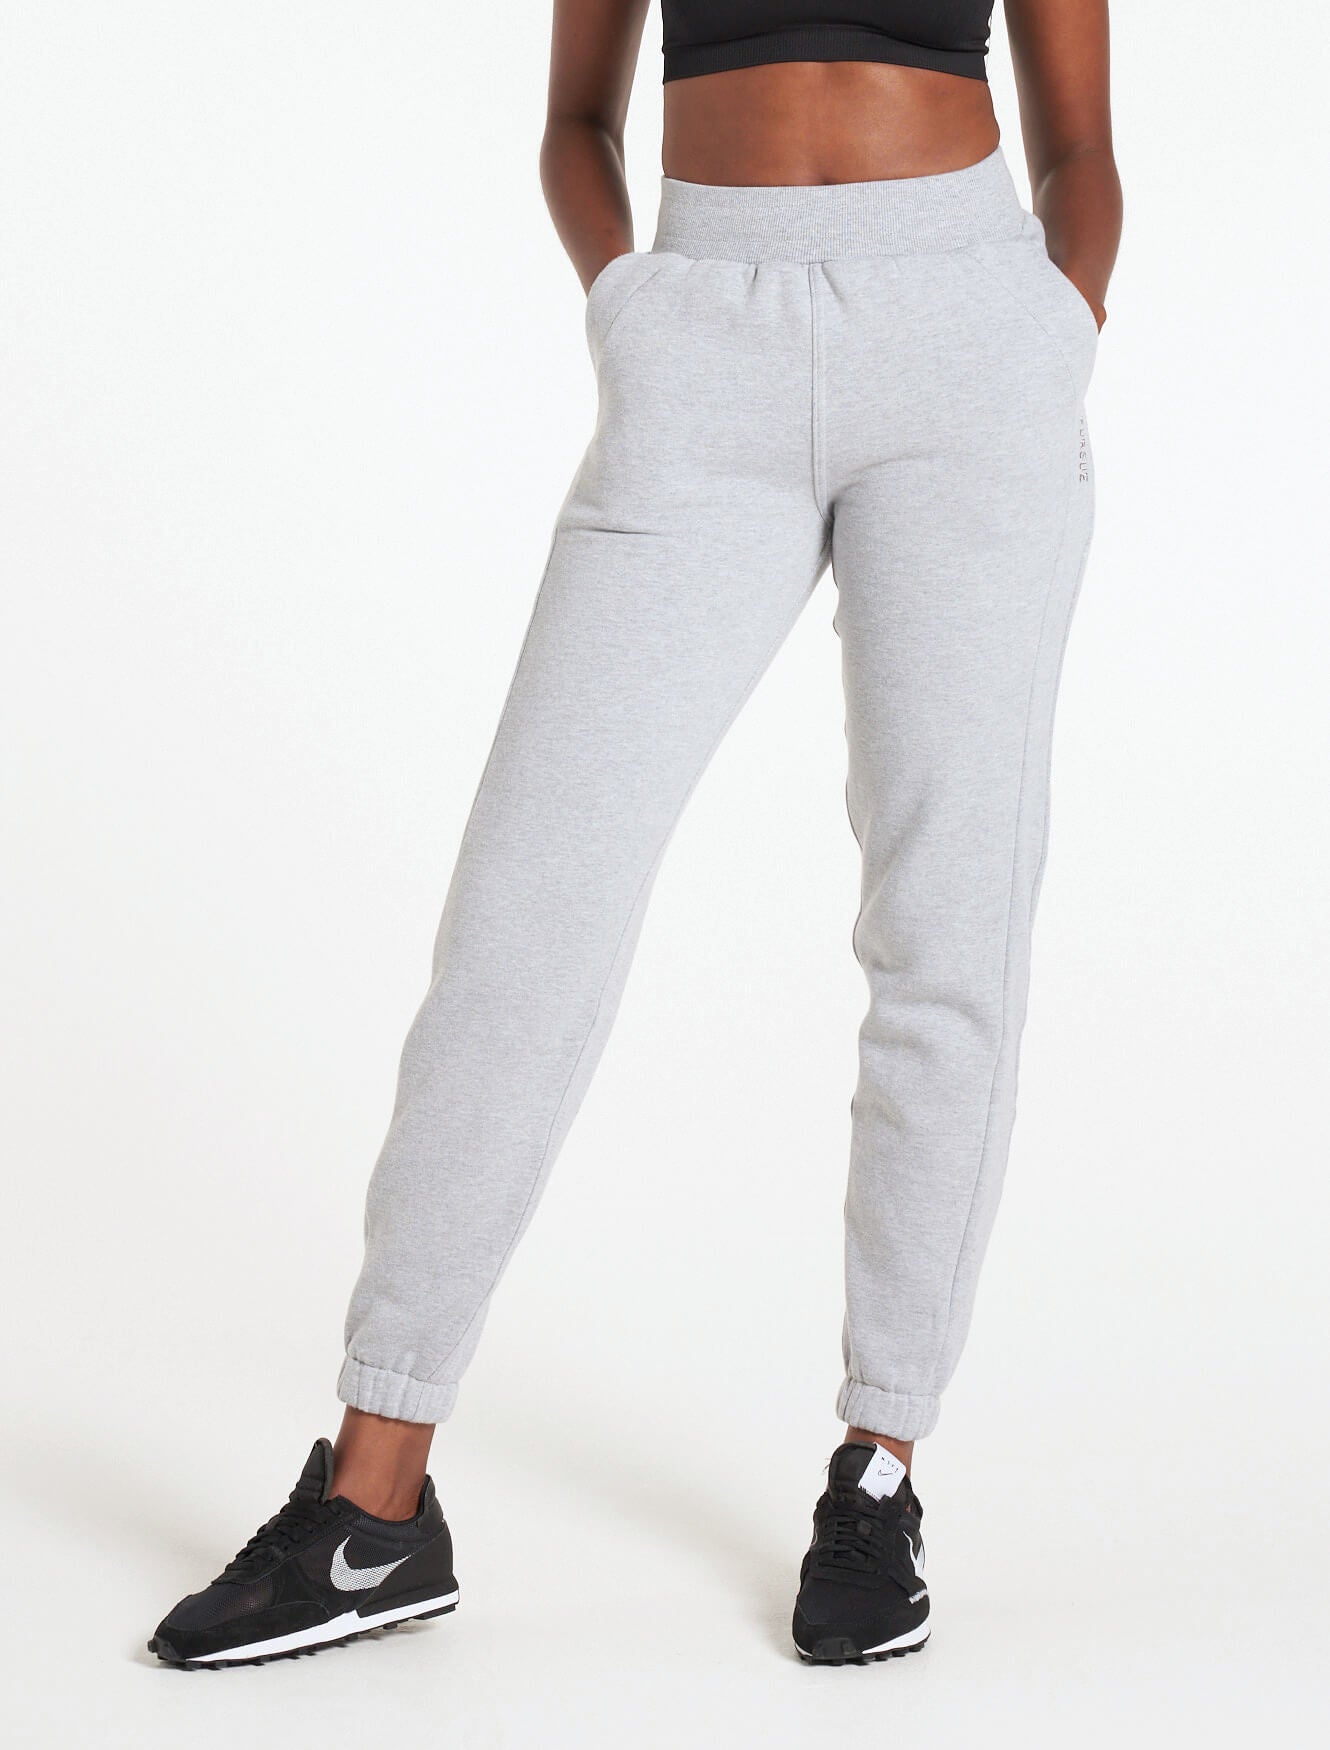 Select Bottoms / Grey Marl Pursue Fitness 1